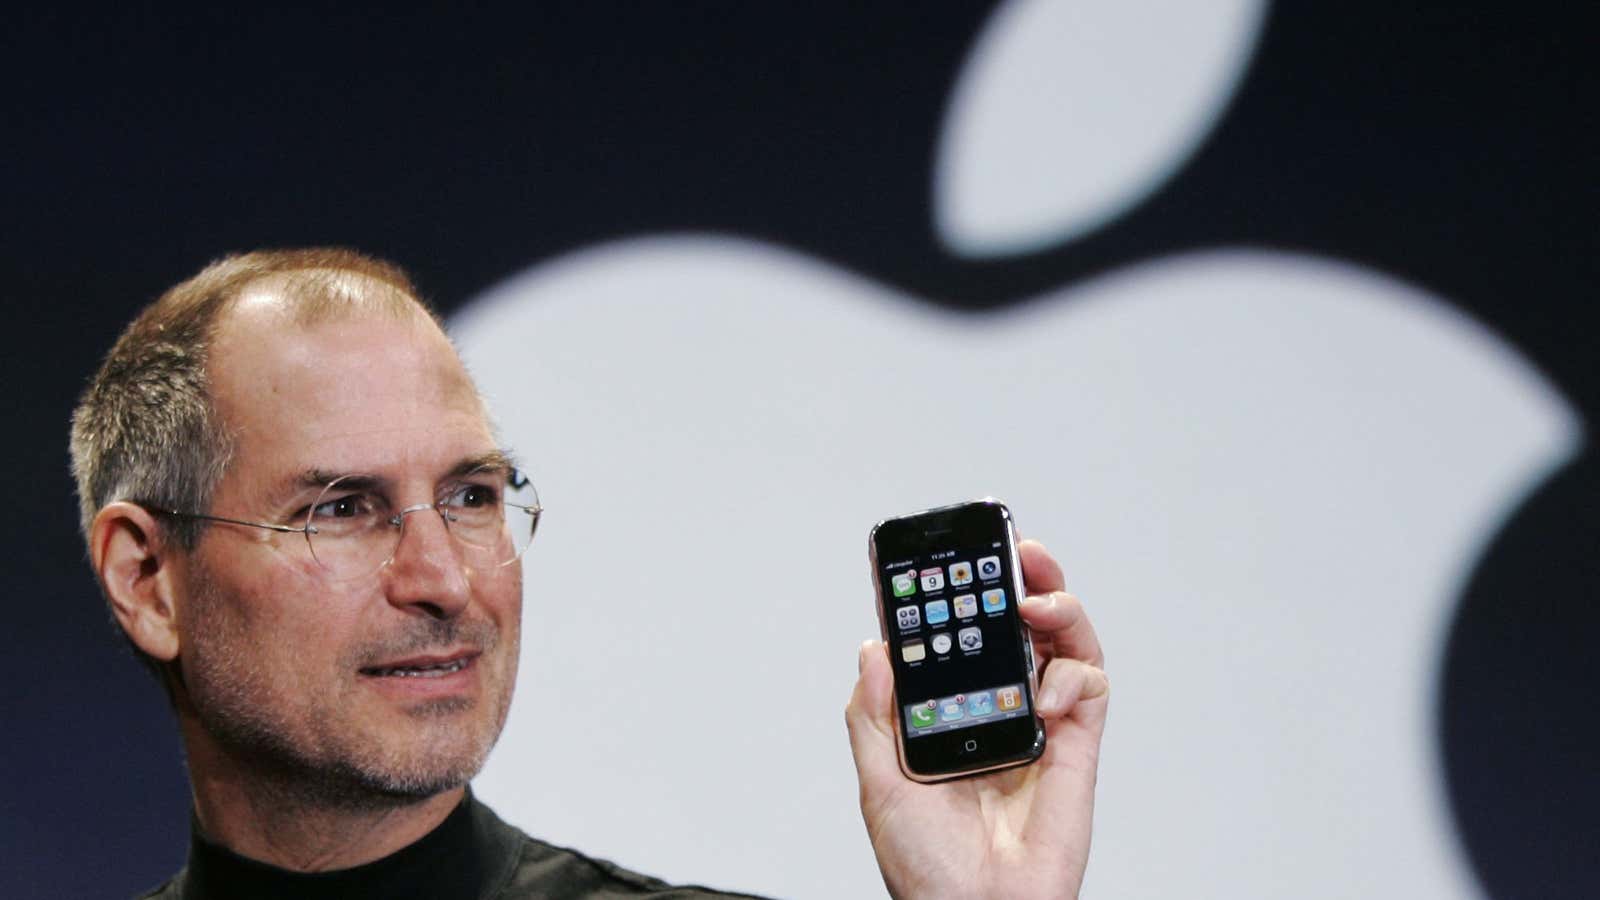 What’s more revolutionary than the first iPhone? An economic revolution.